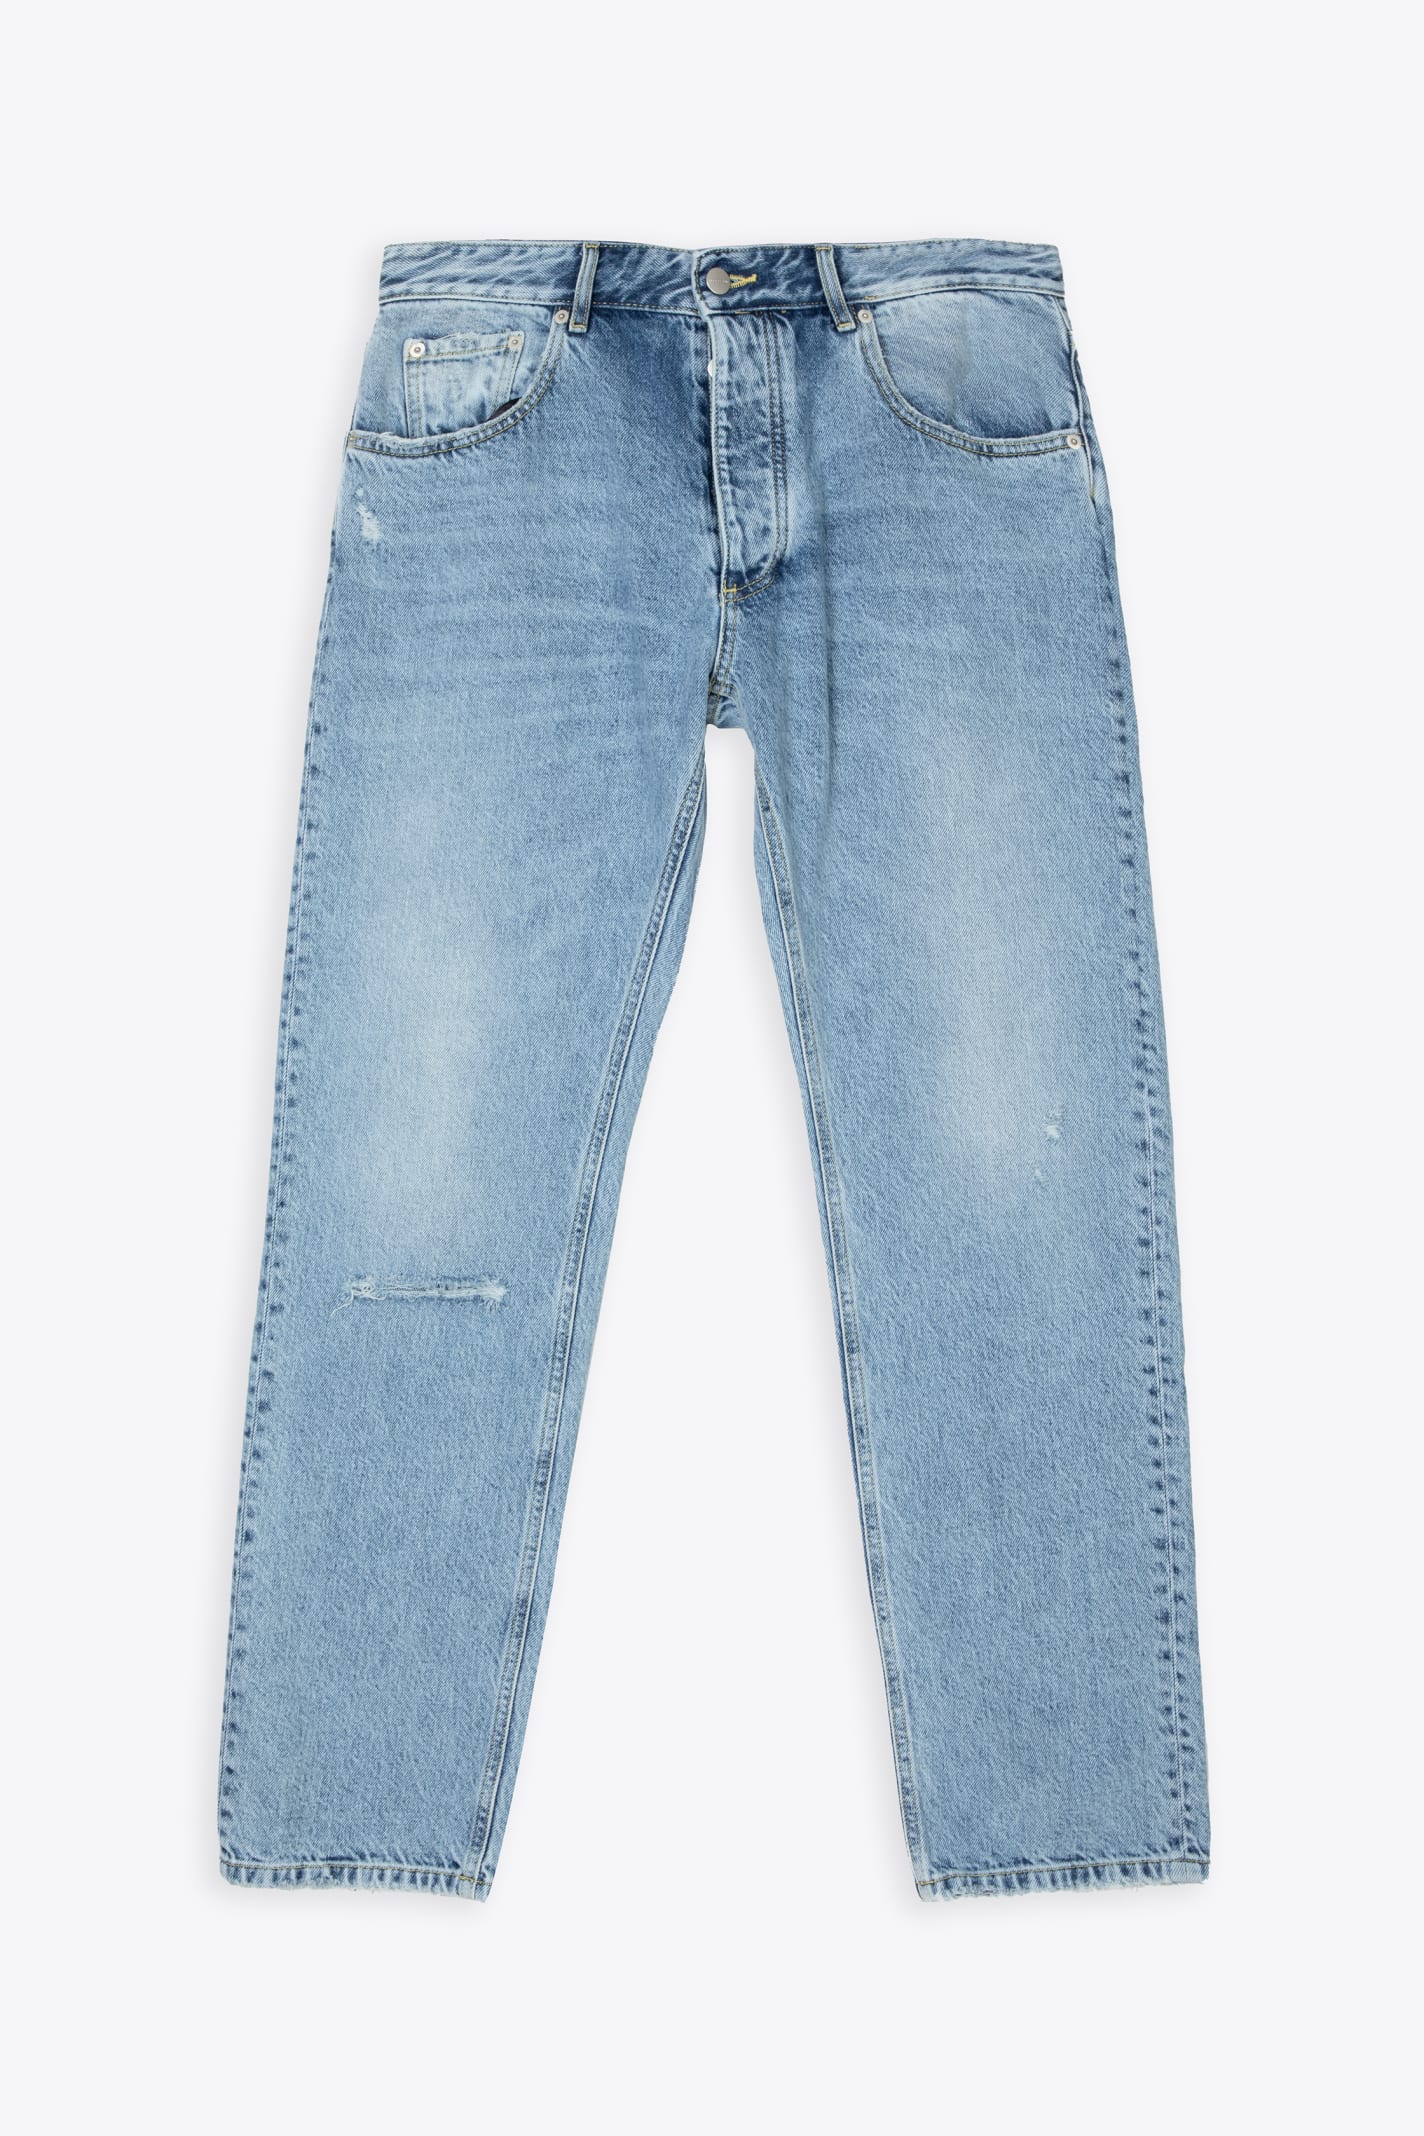 Icon Denim Jeans Light blue relaxed fit jeans - Kanye Eco